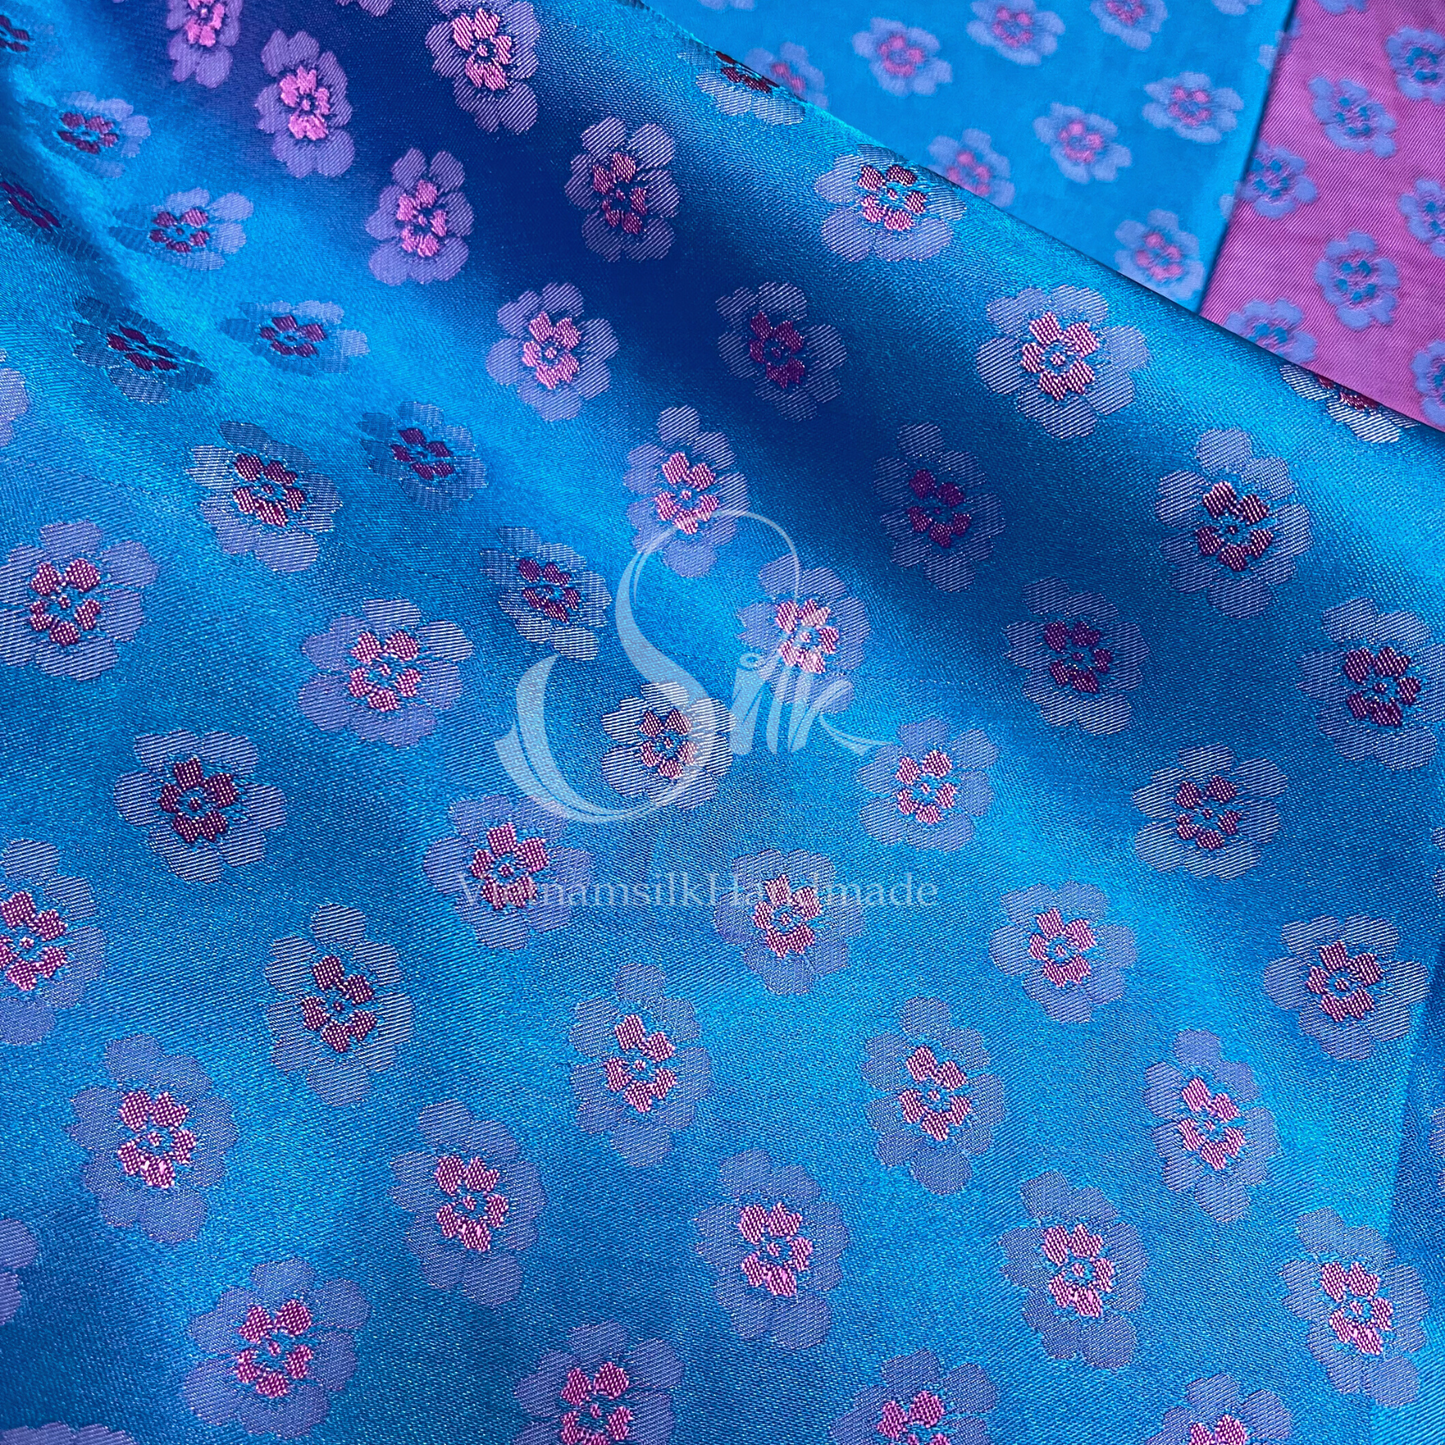 Peach flowers Pattern - Blue Silk with Pink Flowers - PURE MULBERRY SILK fabric by the yard -  Floral Silk -Luxury Silk - Natural silk - Handmade in VietNam